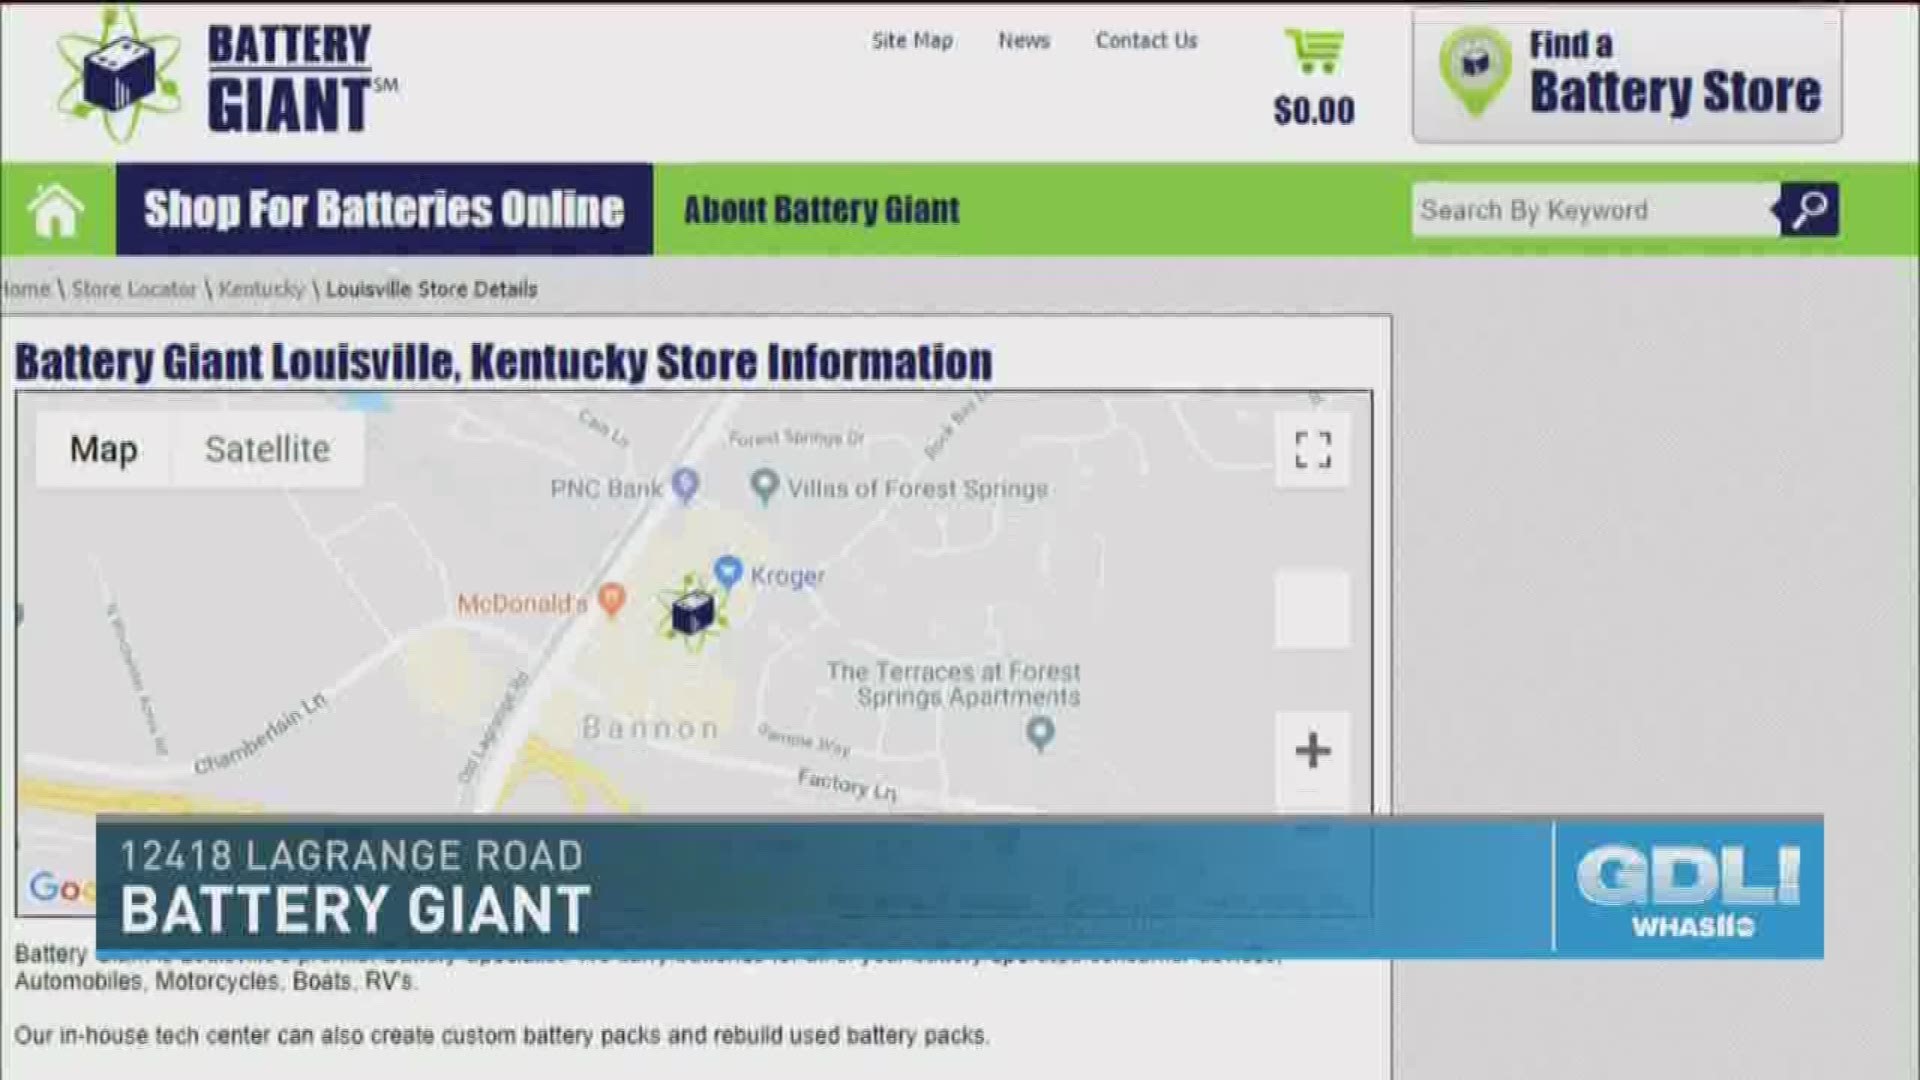 Battery Giant is located at 12418 La Grange Road in Louisville, KY.